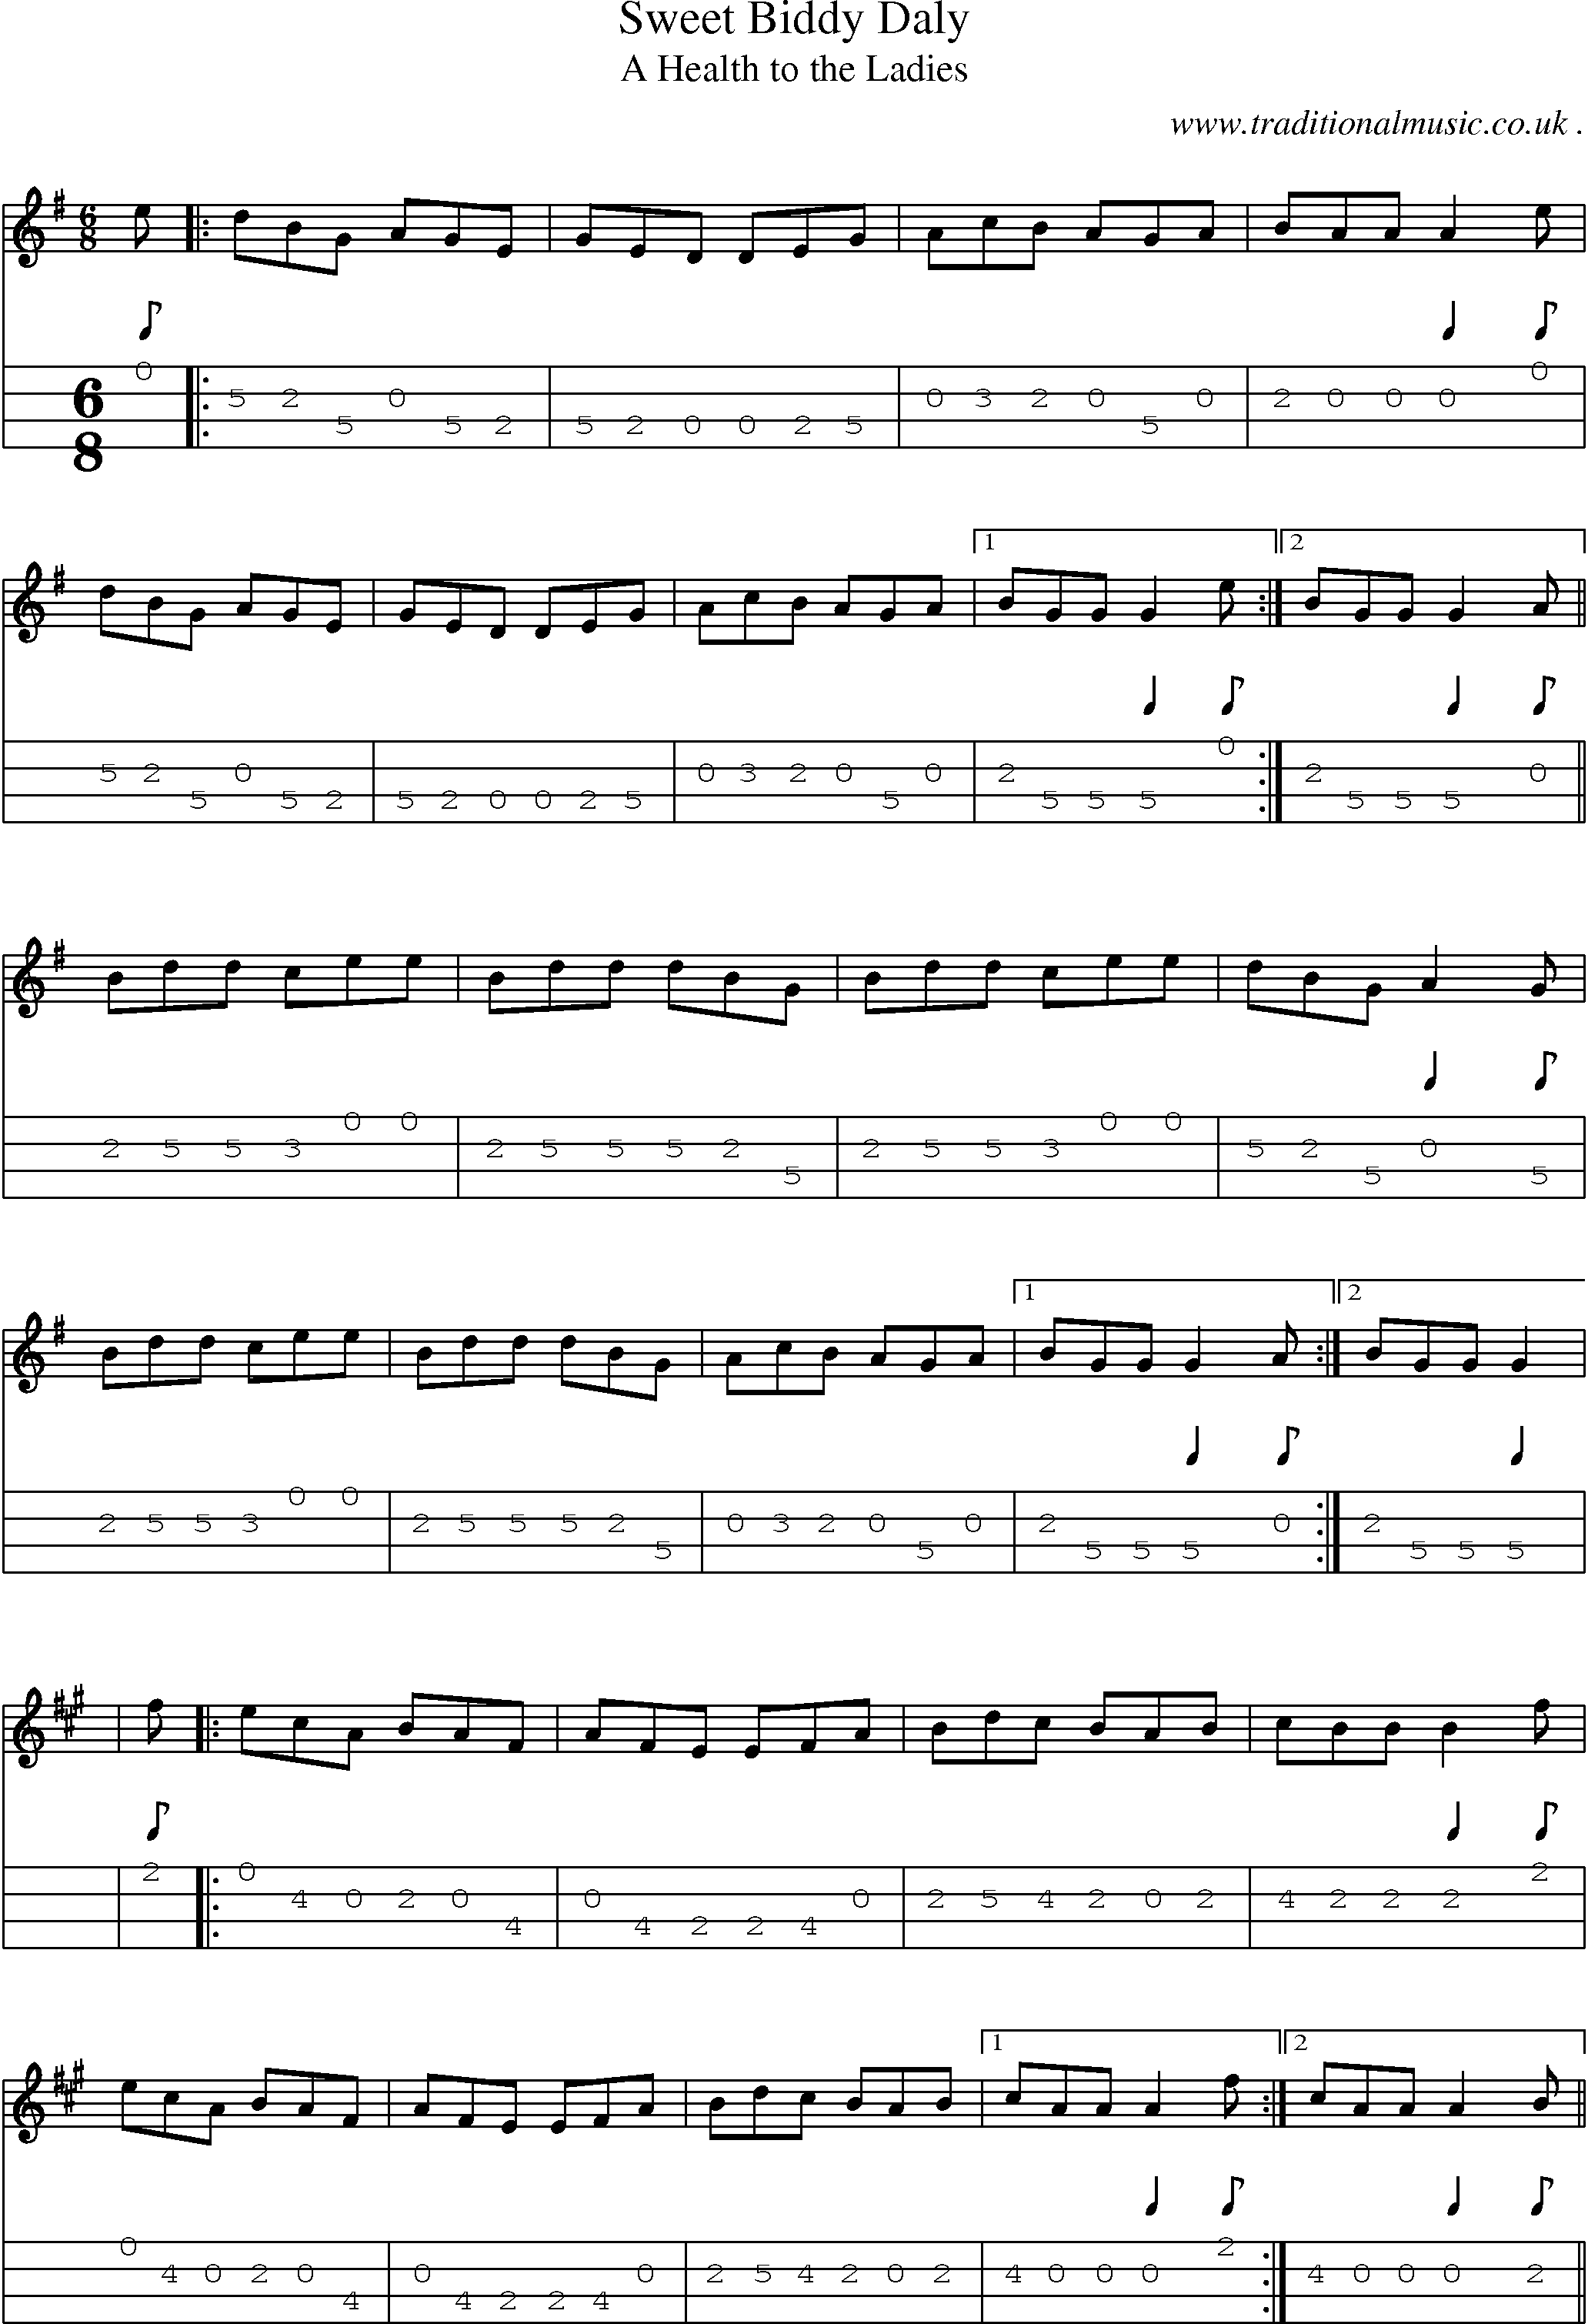 Sheet-Music and Mandolin Tabs for Sweet Biddy Daly